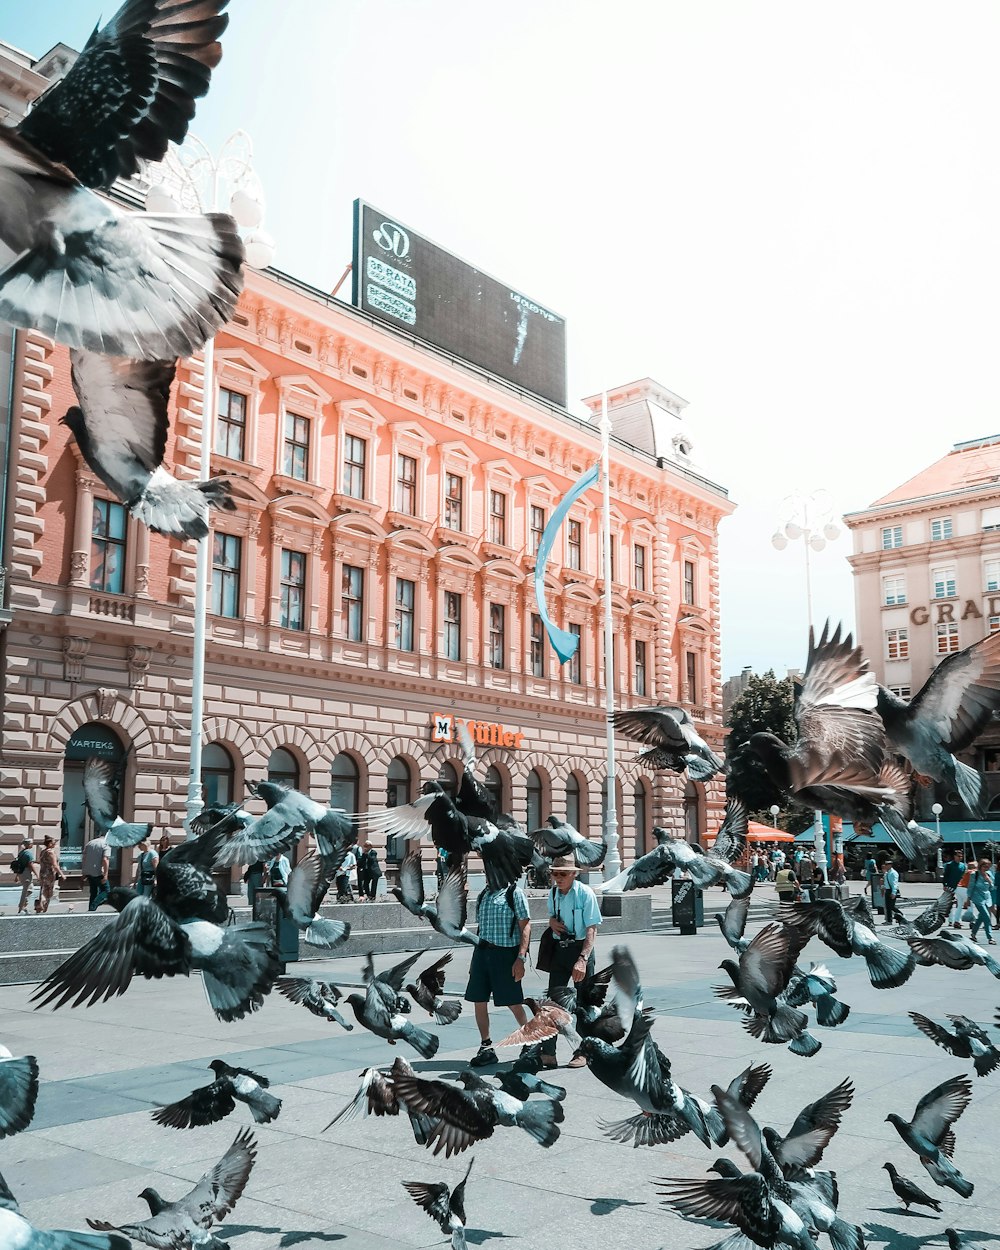 people walking on street with pigeons